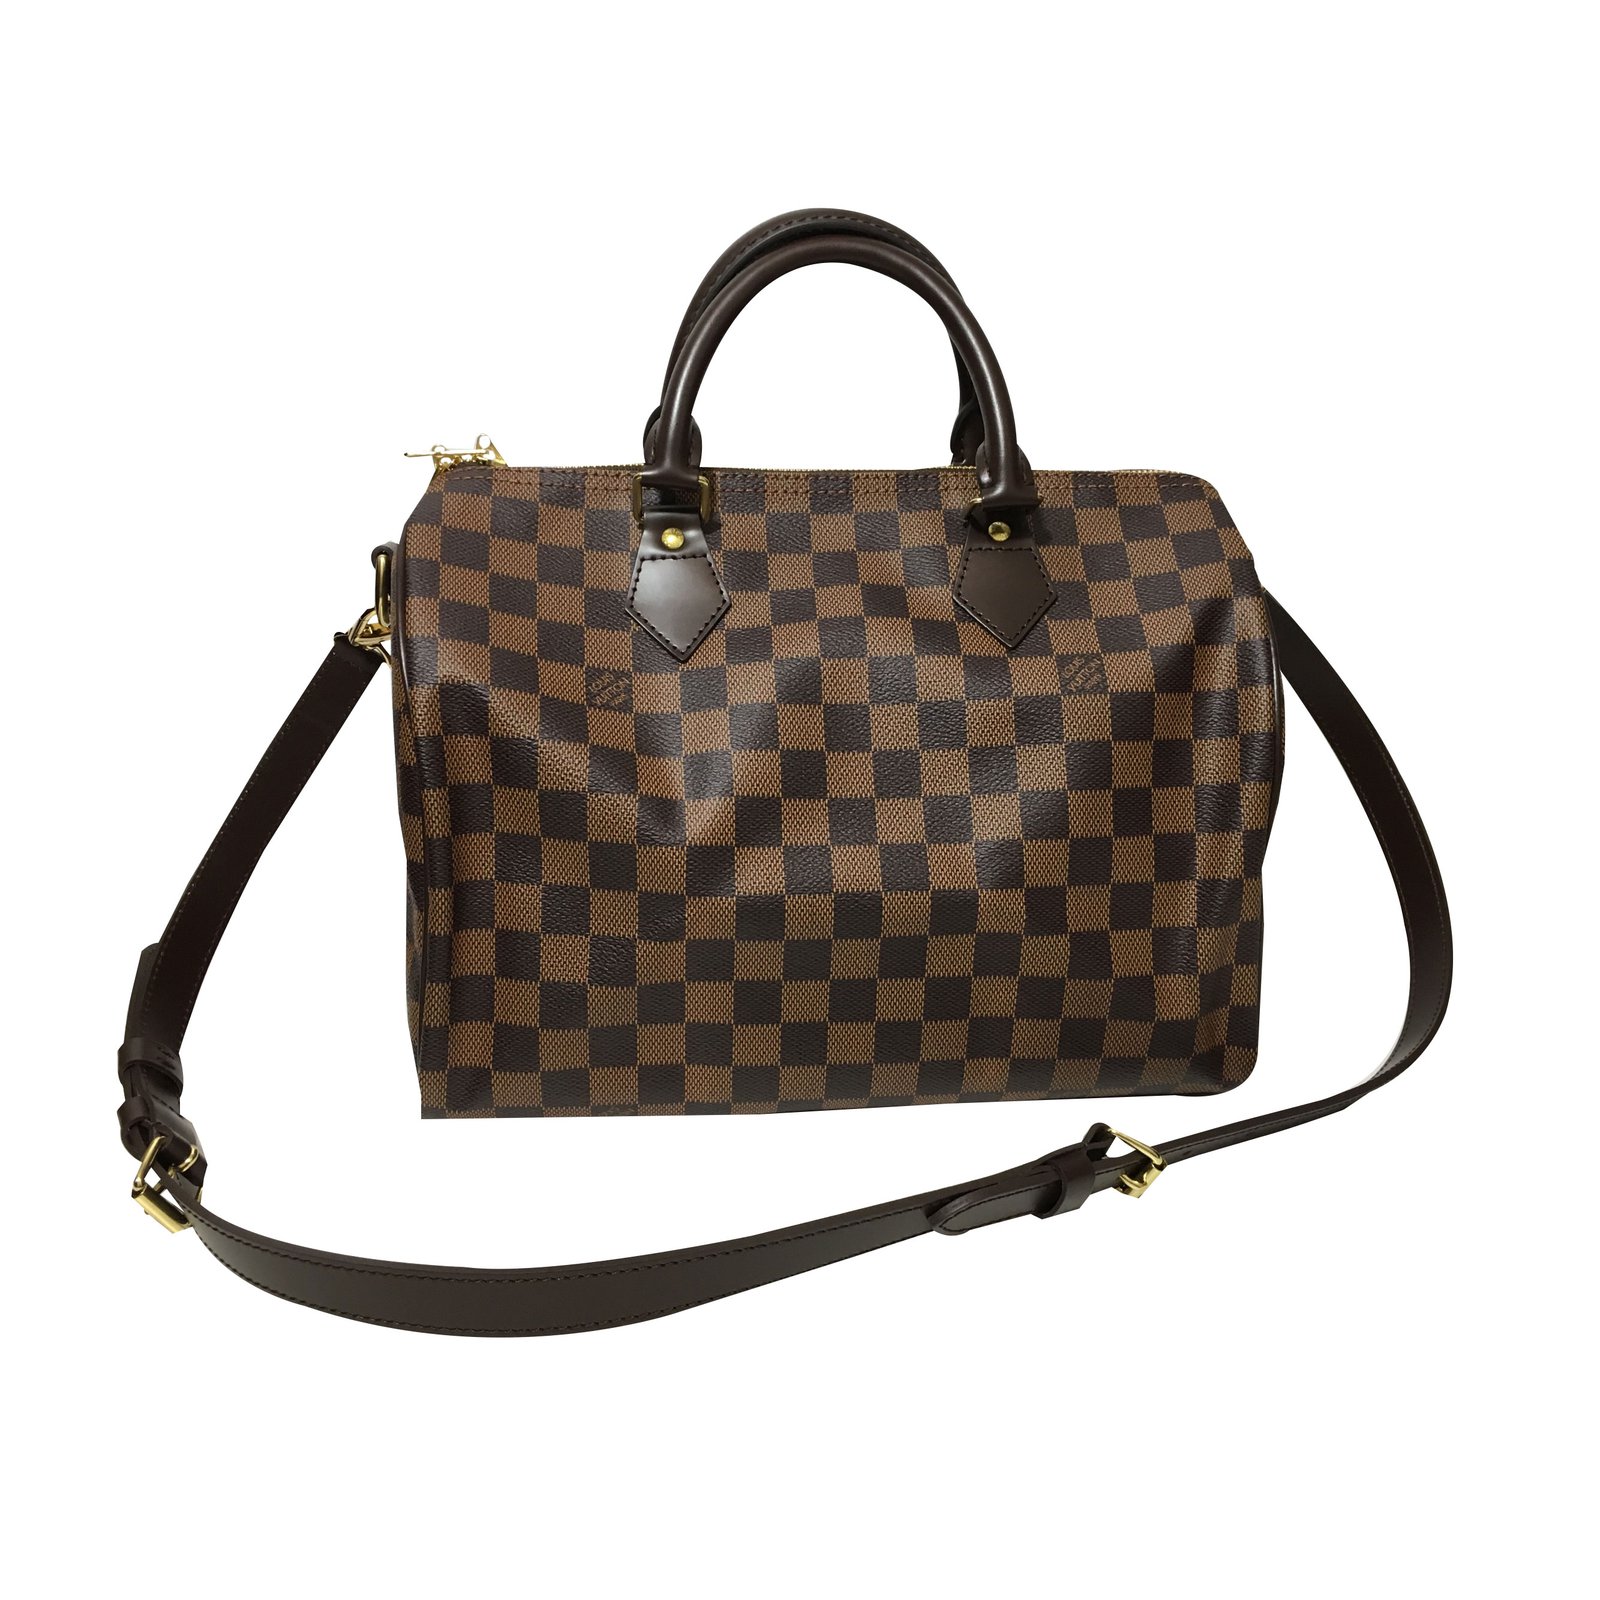 Louis Vuitton Sur La Route Sample | Confederated Tribes of the Umatilla Indian Reservation